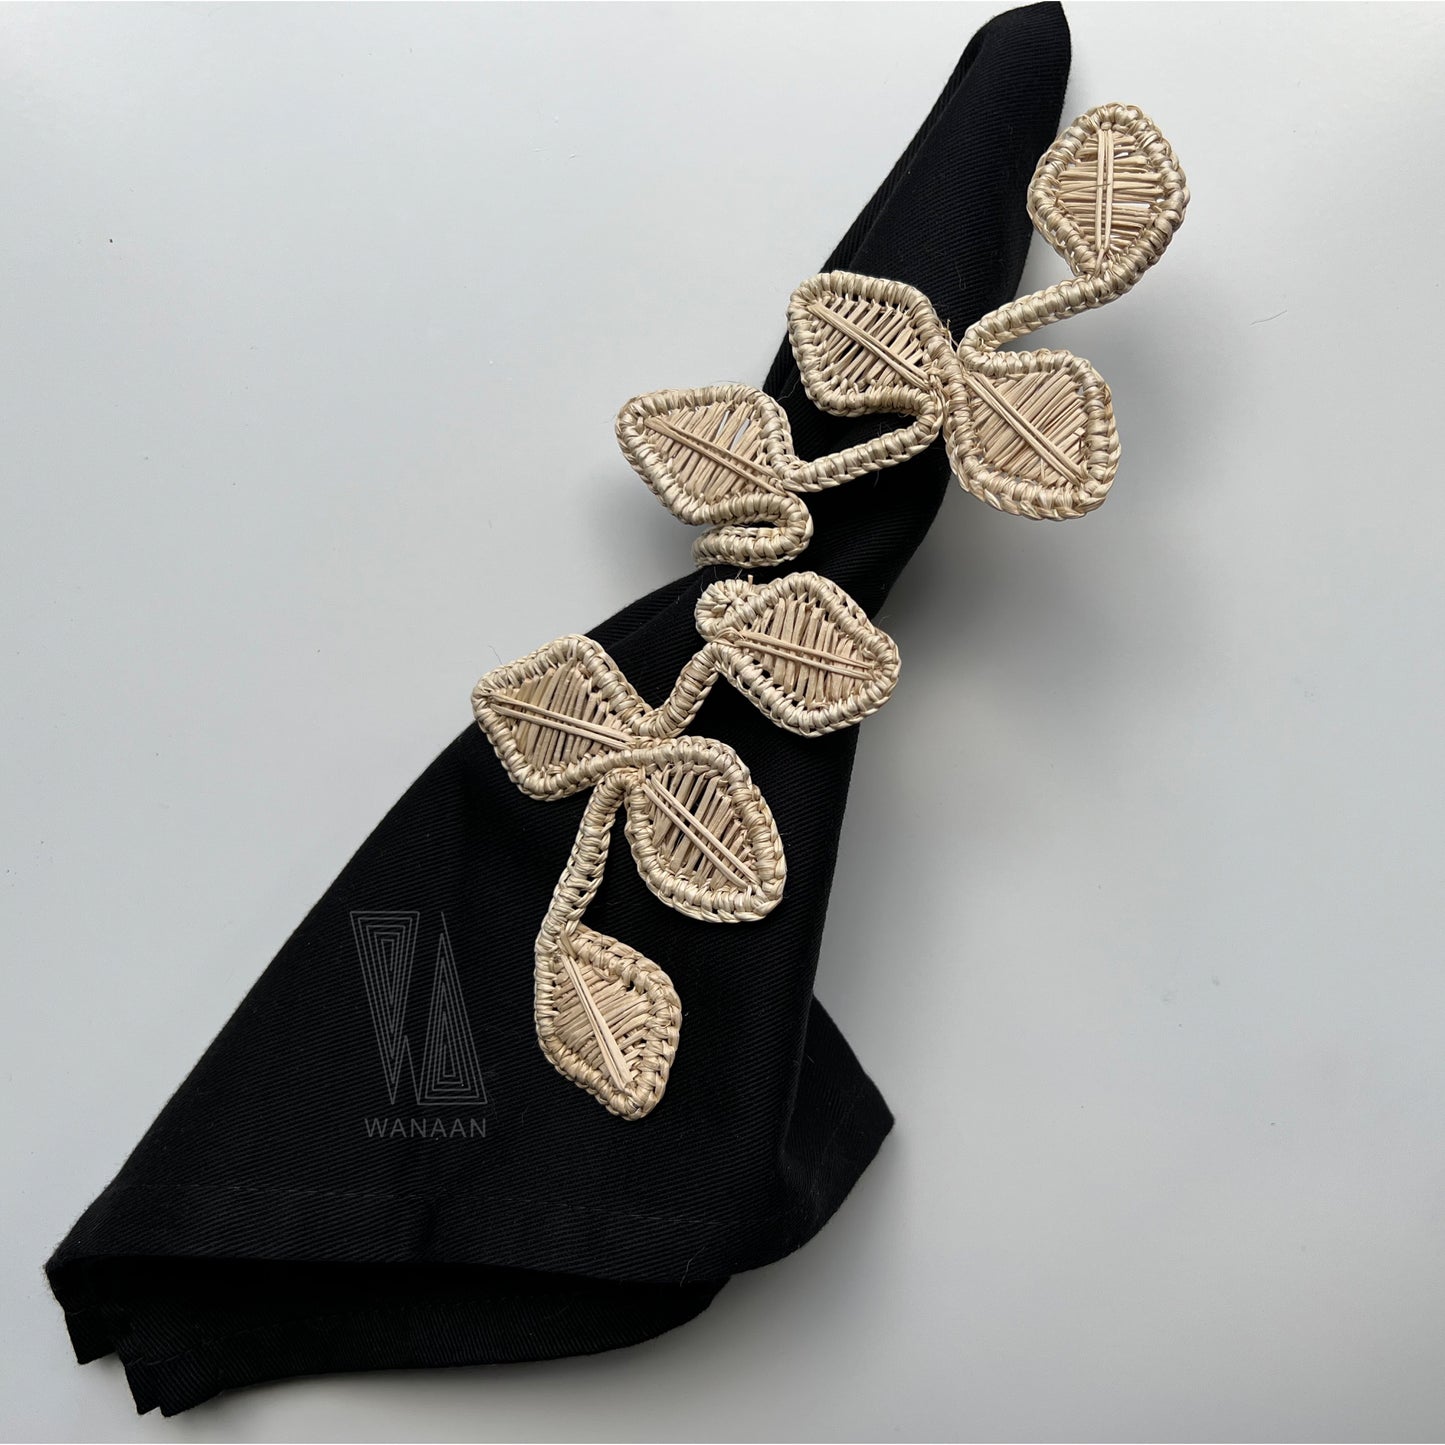 Leaf Napkin Ring Style, Iraca Straw Napkin Ring, Handmade Napkin Ring from Colombia - Set of 4 OR 6 Napkin Rings